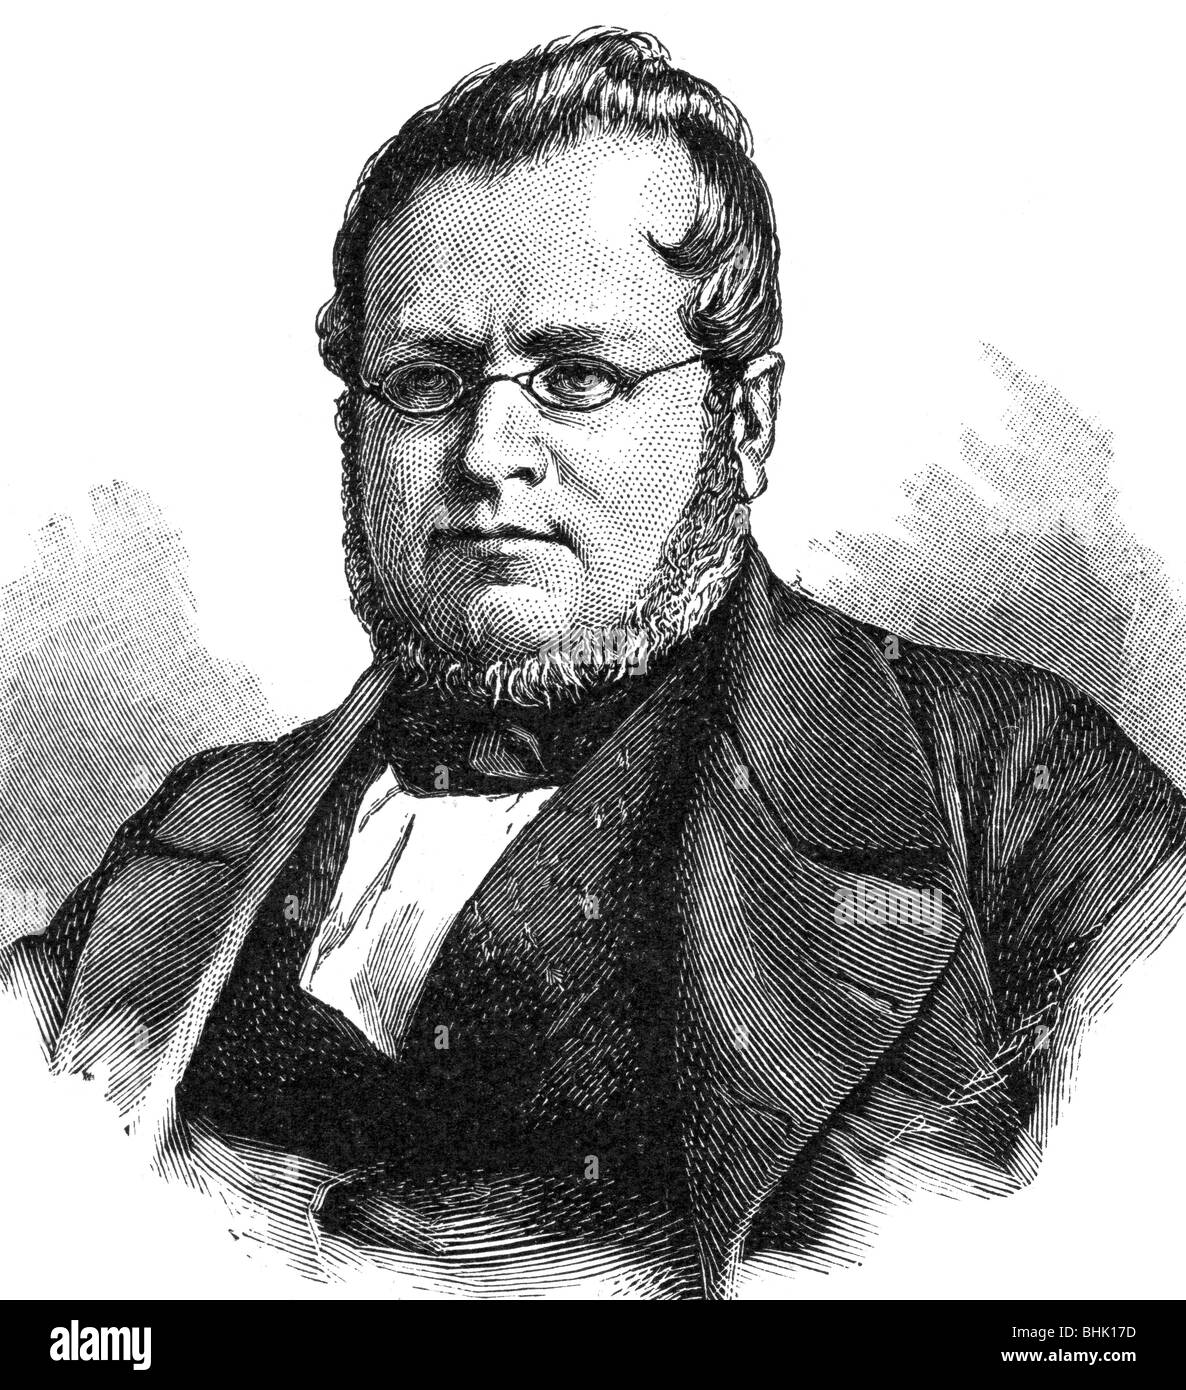 Cavour, Camillo, Count of, 10.8.1810 - - 6.6.1861, Italian politician, Prime Minster of the Kingdom of Sardinia 1852 - 1859 and 1860 - 1861, portrait, Lithograph by Desmaison, 1856, , Stock Photo